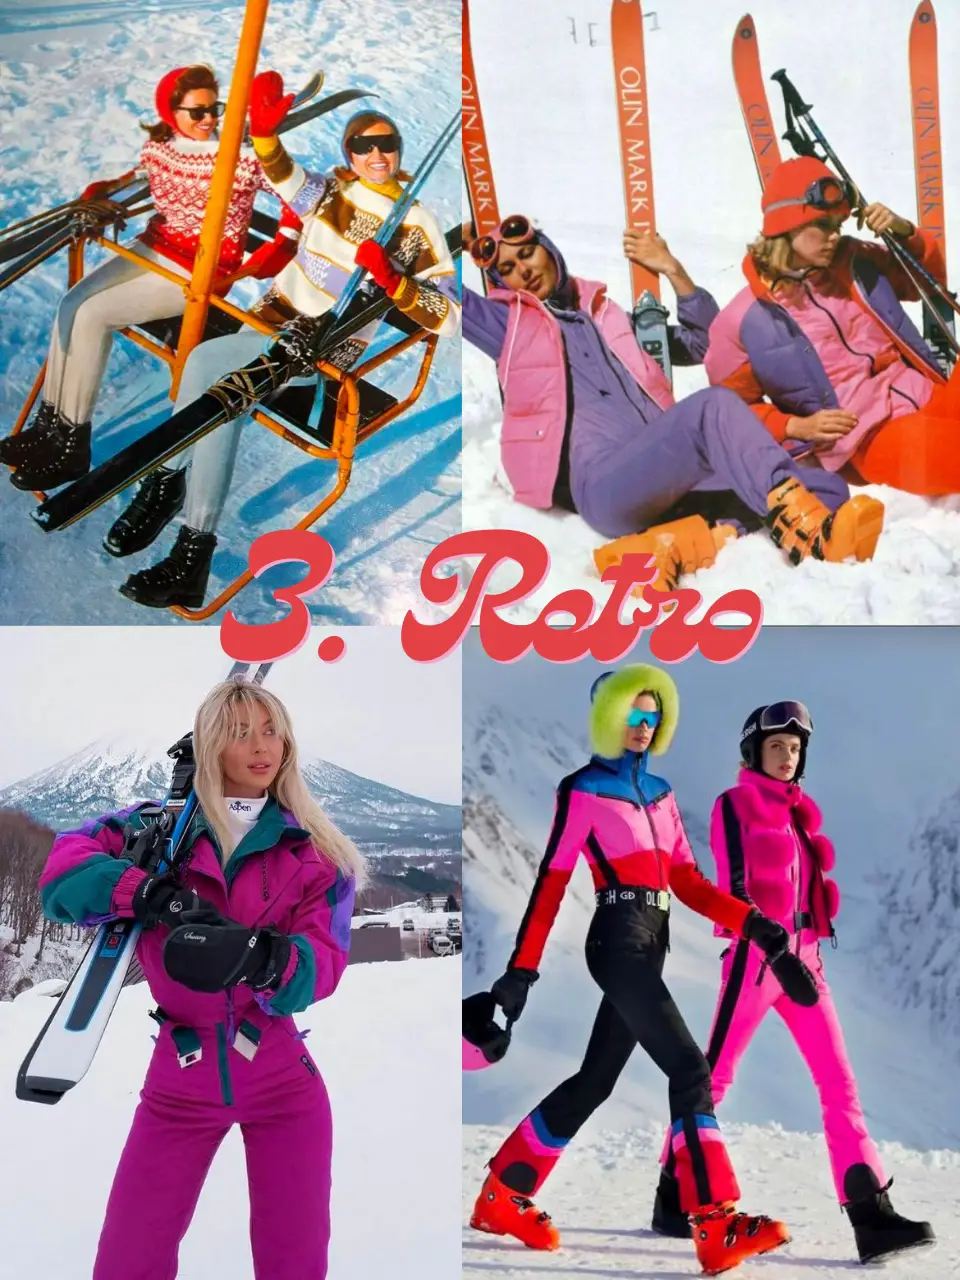 25 Chic Ski Outfits To Wear On The Slopes  Skiing outfit, Snow outfits for  women, Ski outfit for women